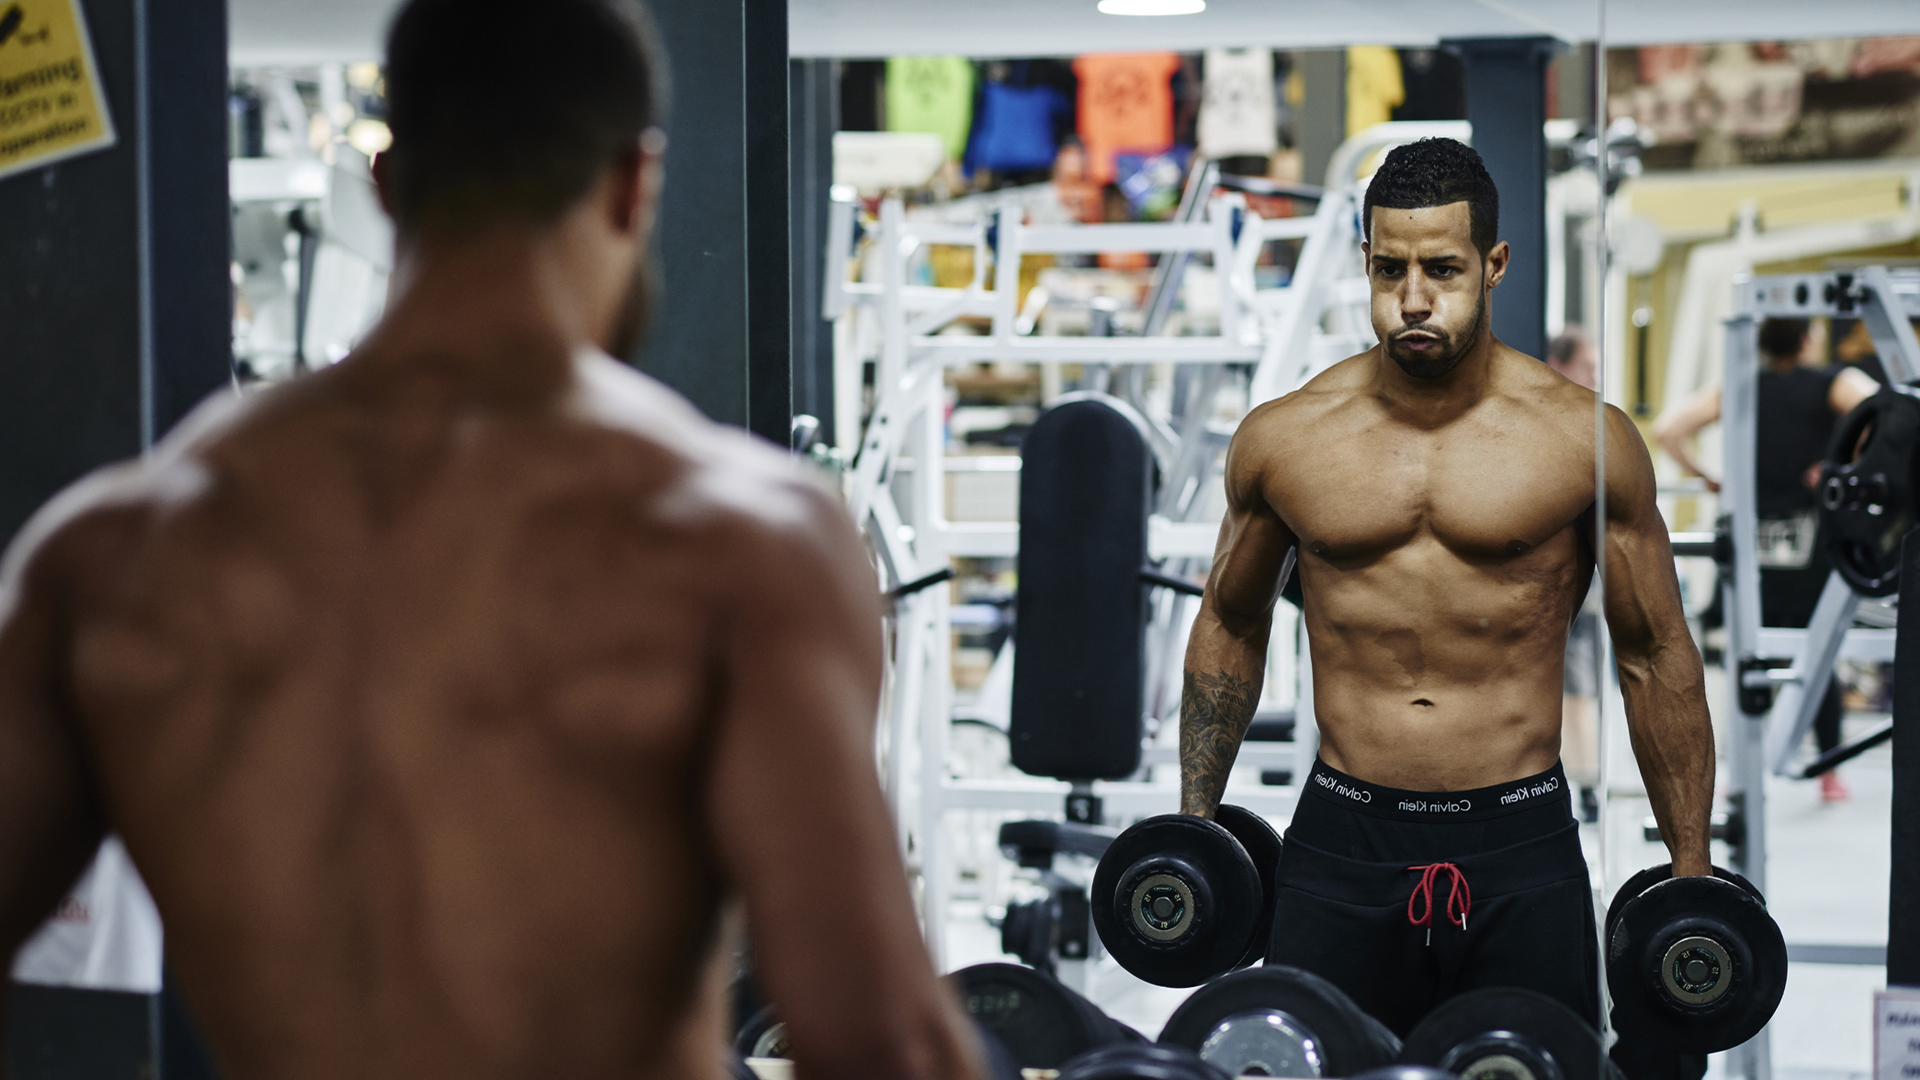 Things You Need To Know Before Dating A Gym Rat